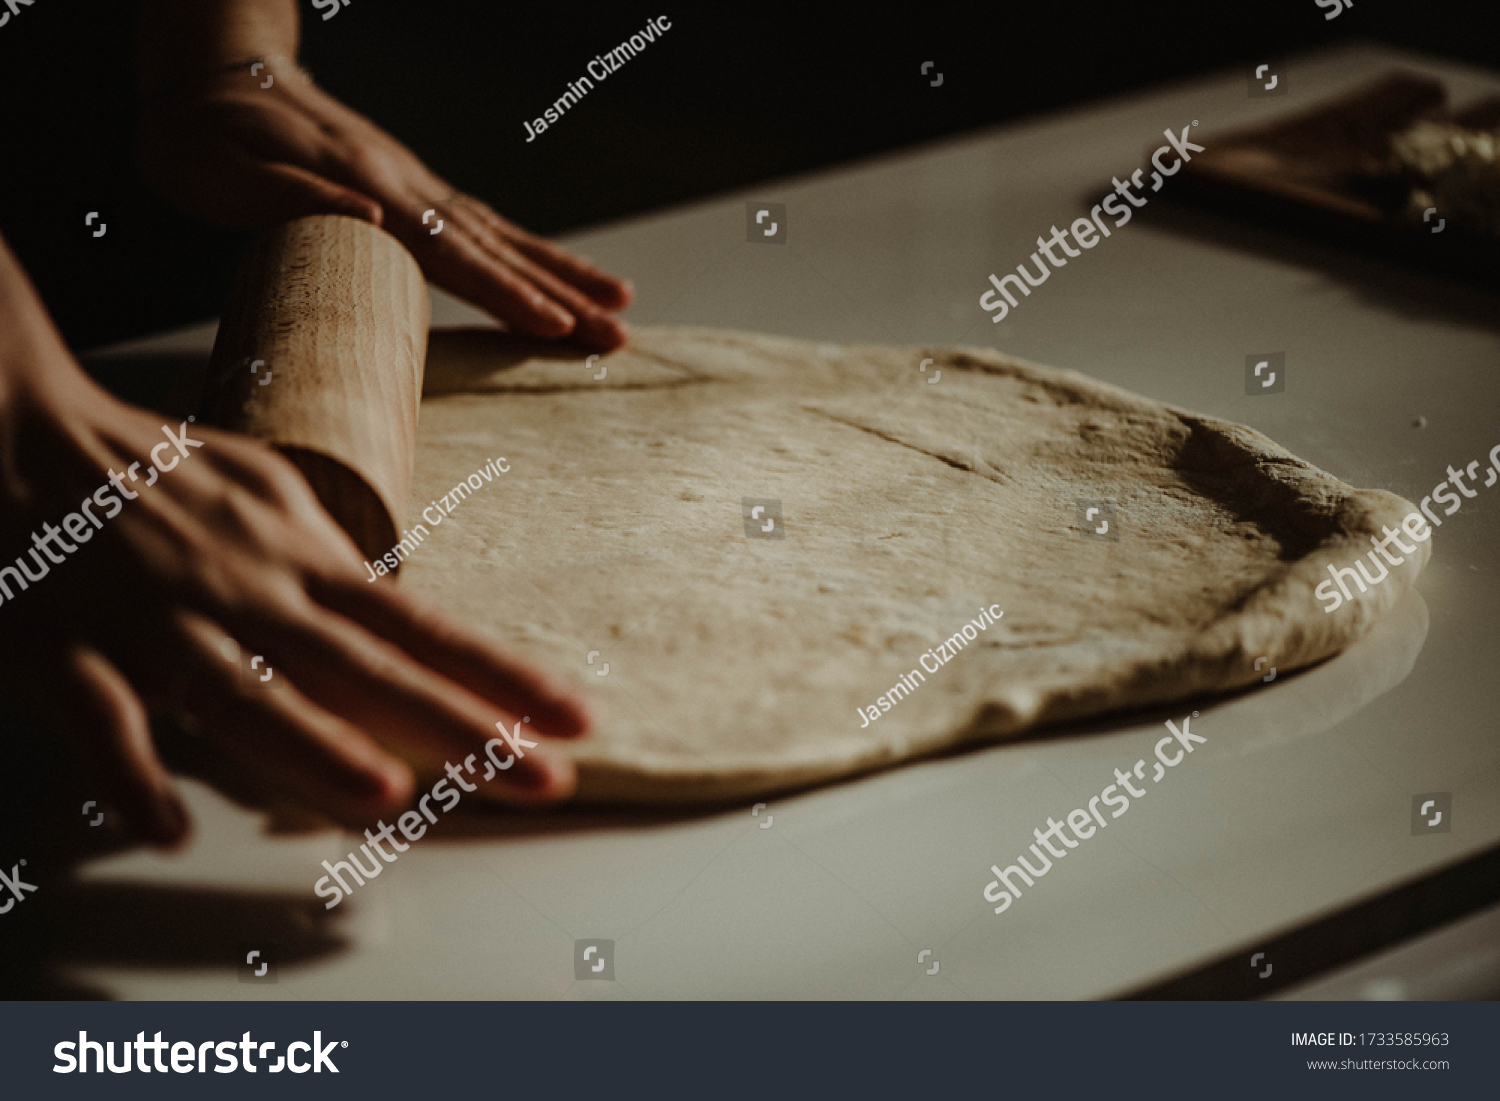 Wife making a homemade doughy pastry food with smoked cheese during Ramadan for dinner during the sunset light in the home on the wooden table #1733585963